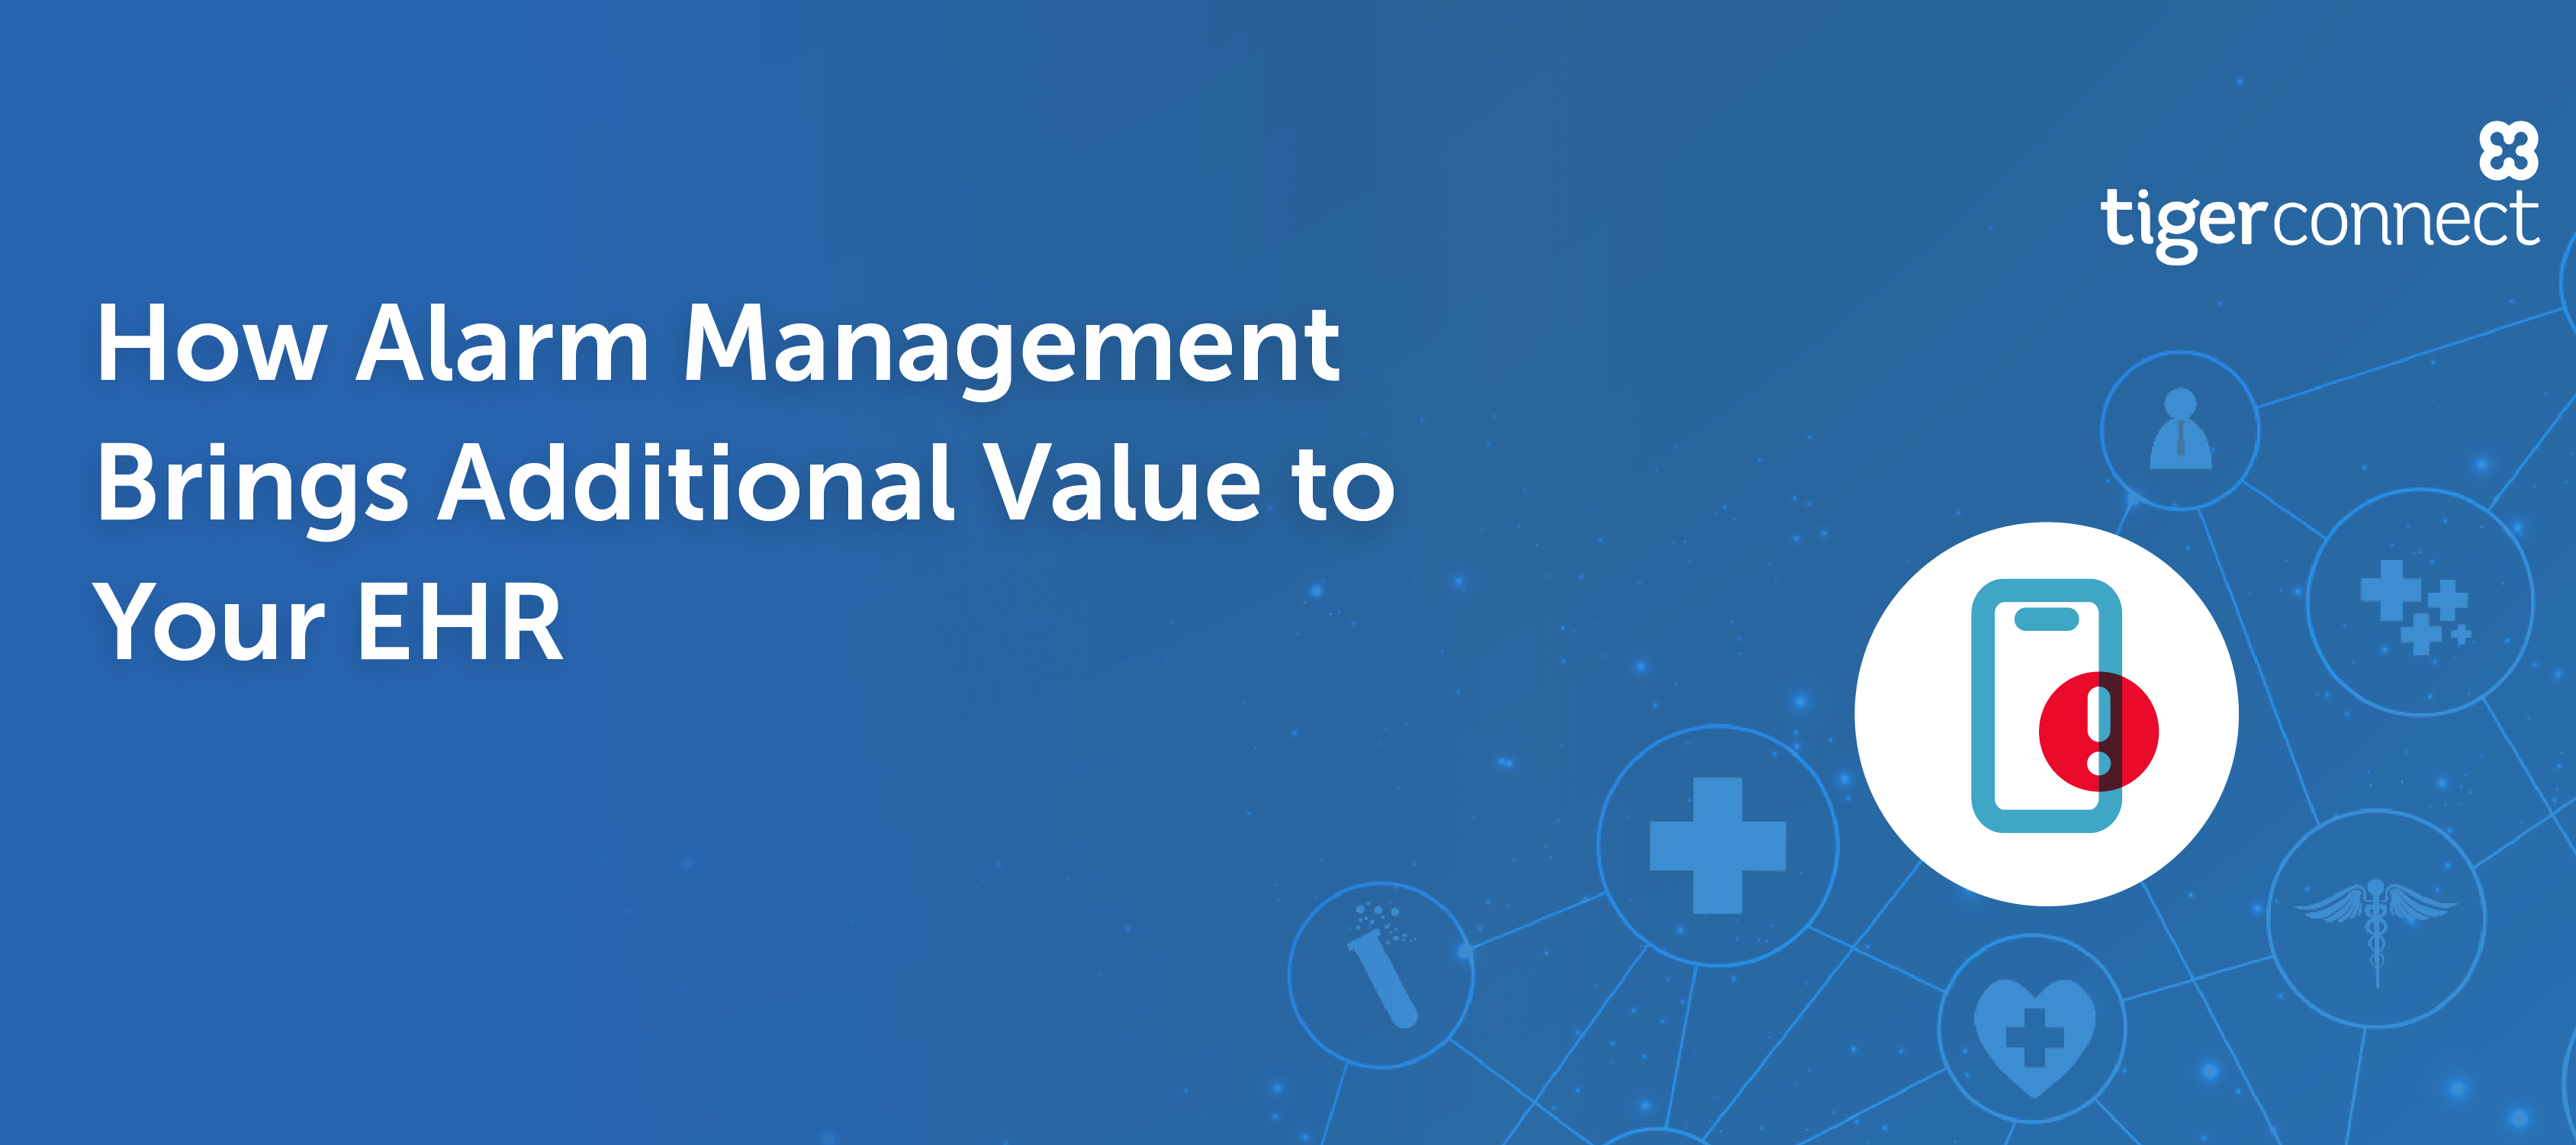 How Alarm Management Brings Additional Value to Your EHR